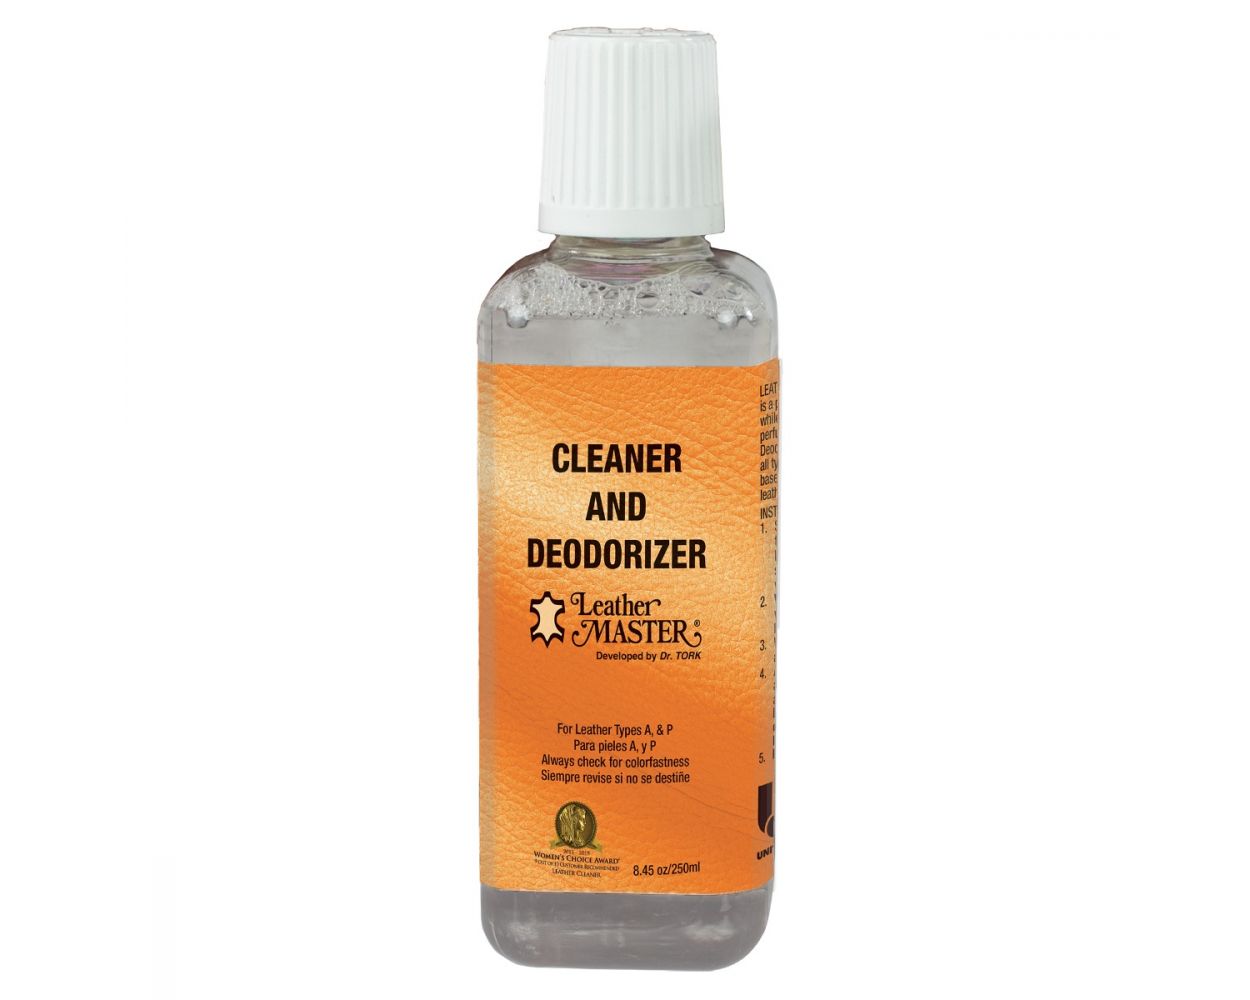 Master Leather Cleaner and Deodorizer